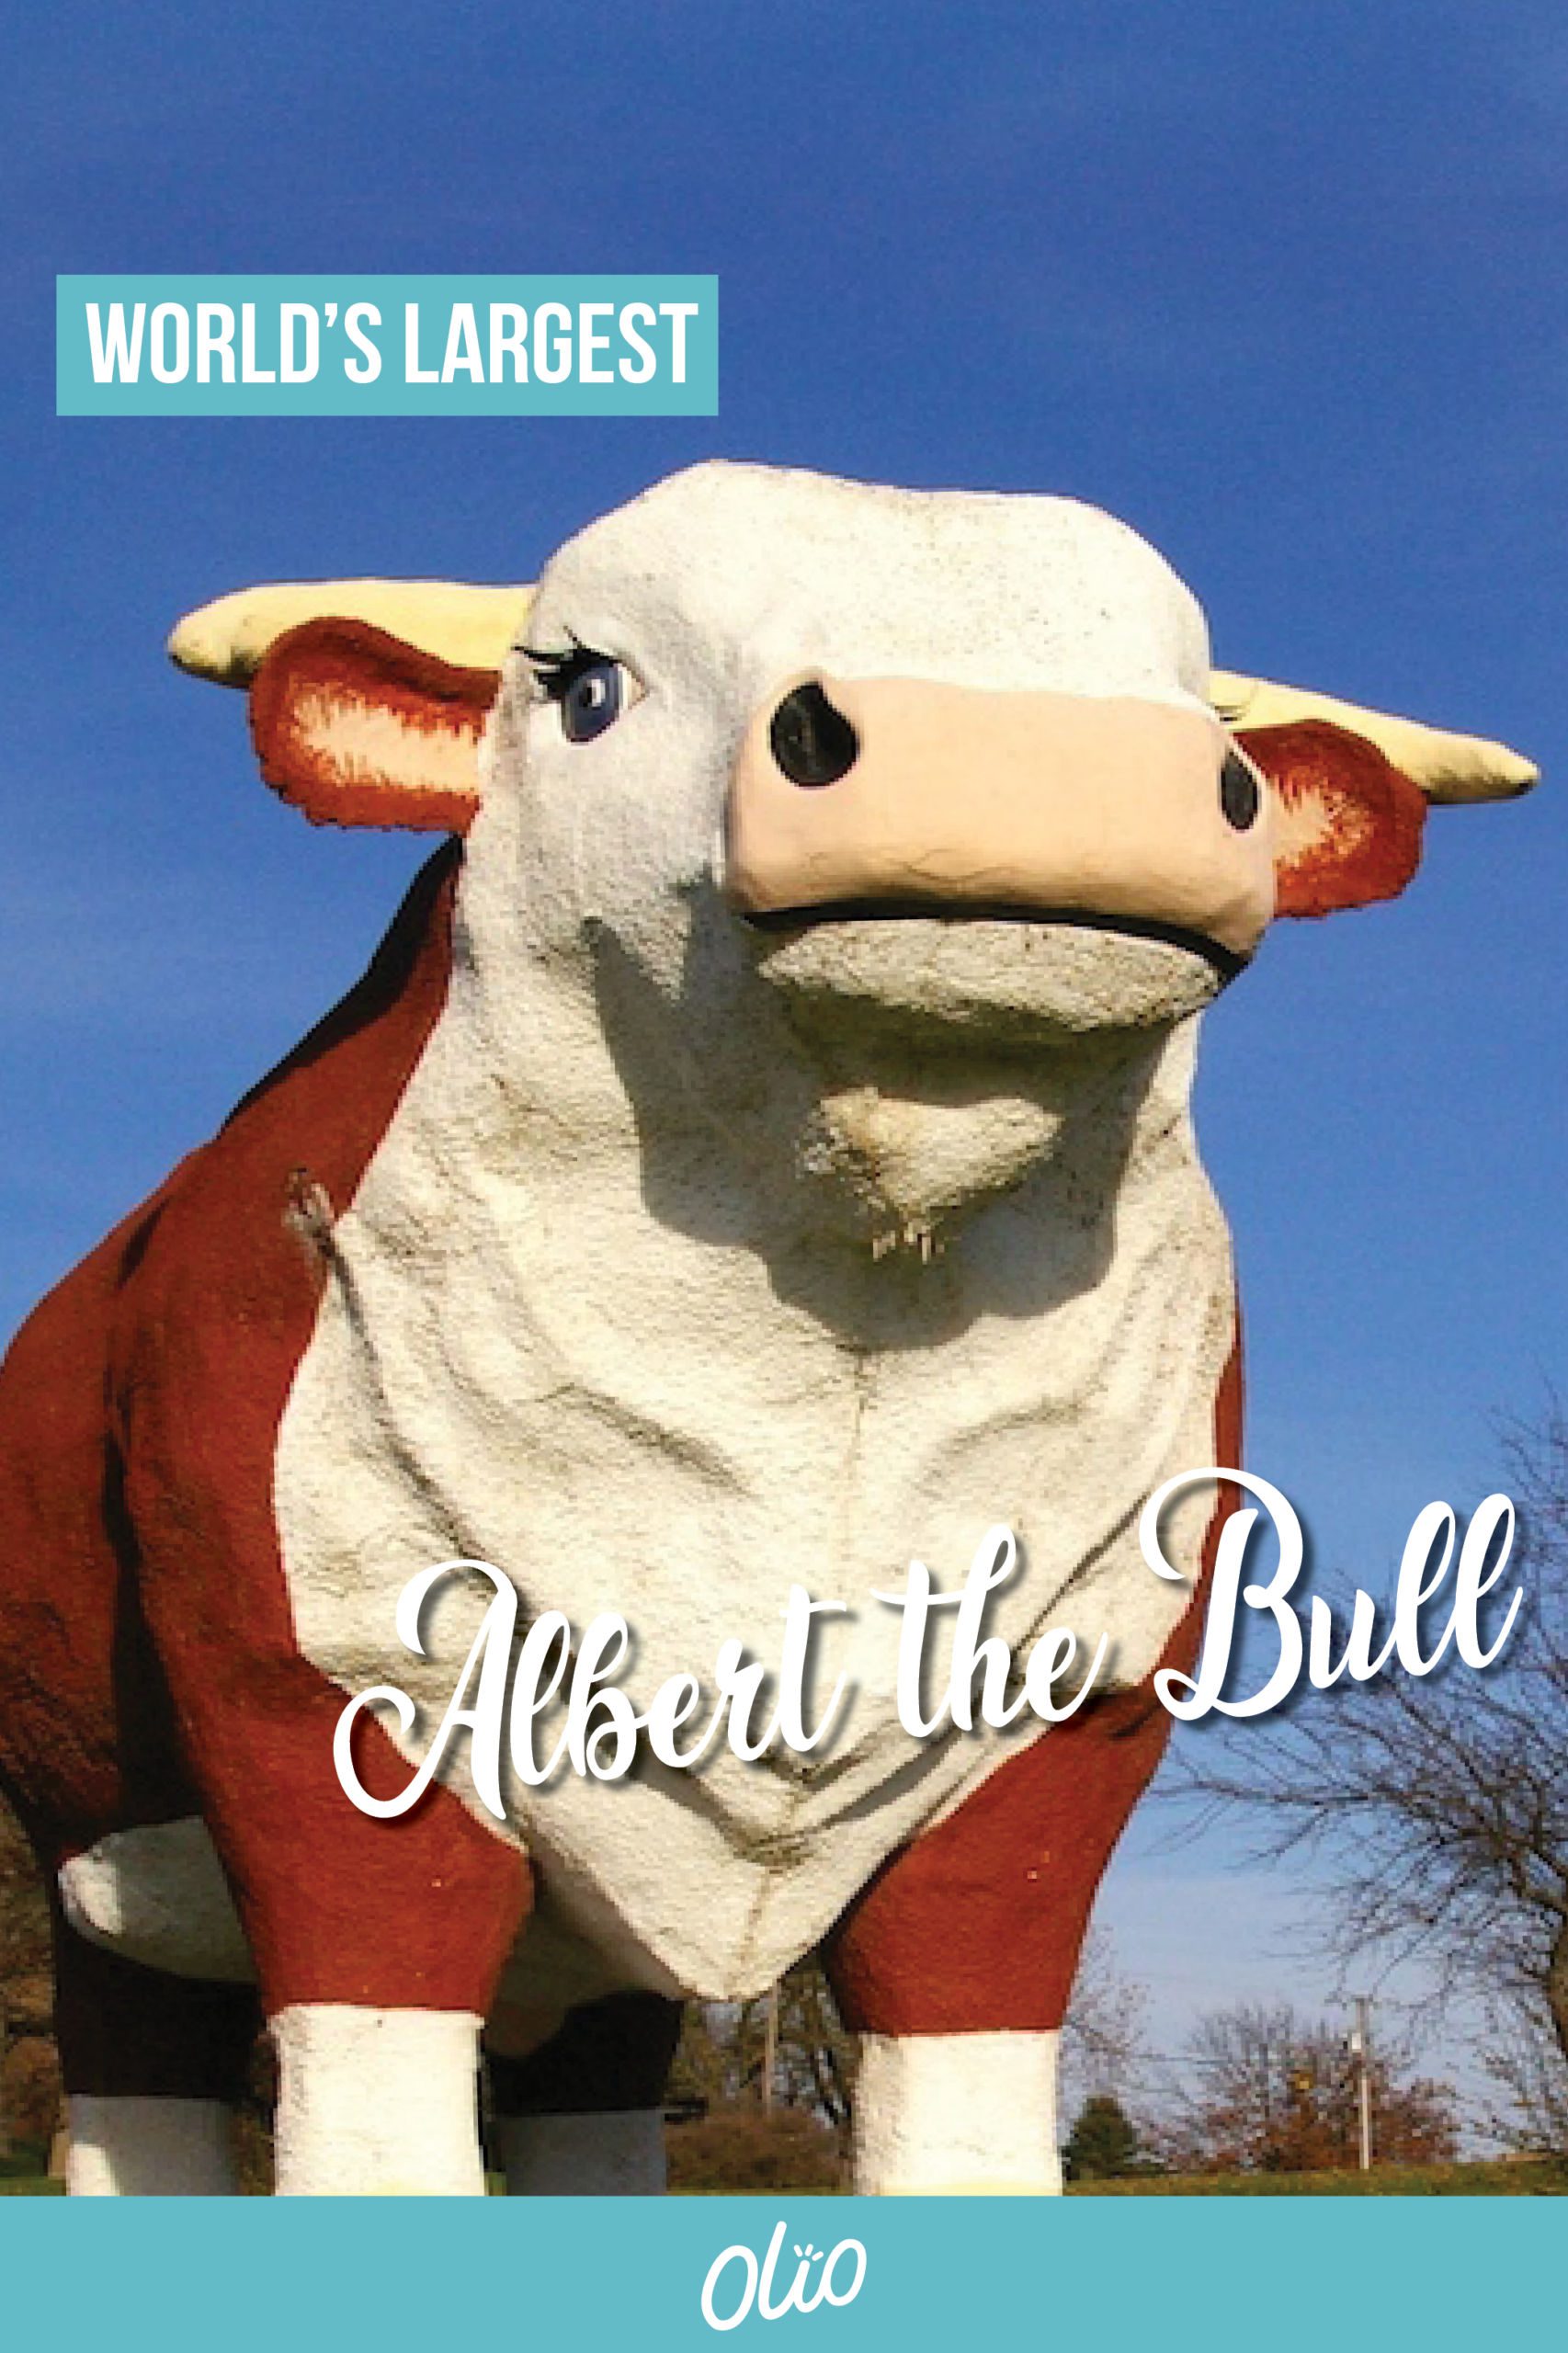 Looking for an offbeat Iowa attraction? Meet Albert the World's Largest Bull! A realistic Hereford replica, Albert calls Audubon, Iowa home. Towering 30 feet over the sprawling Iowa countryside, the concrete bull is a symbol not only of the area’s cattle raising past but also of its hopes for future generations. #Iowa #WorldsLargest #RoadsideAttractions